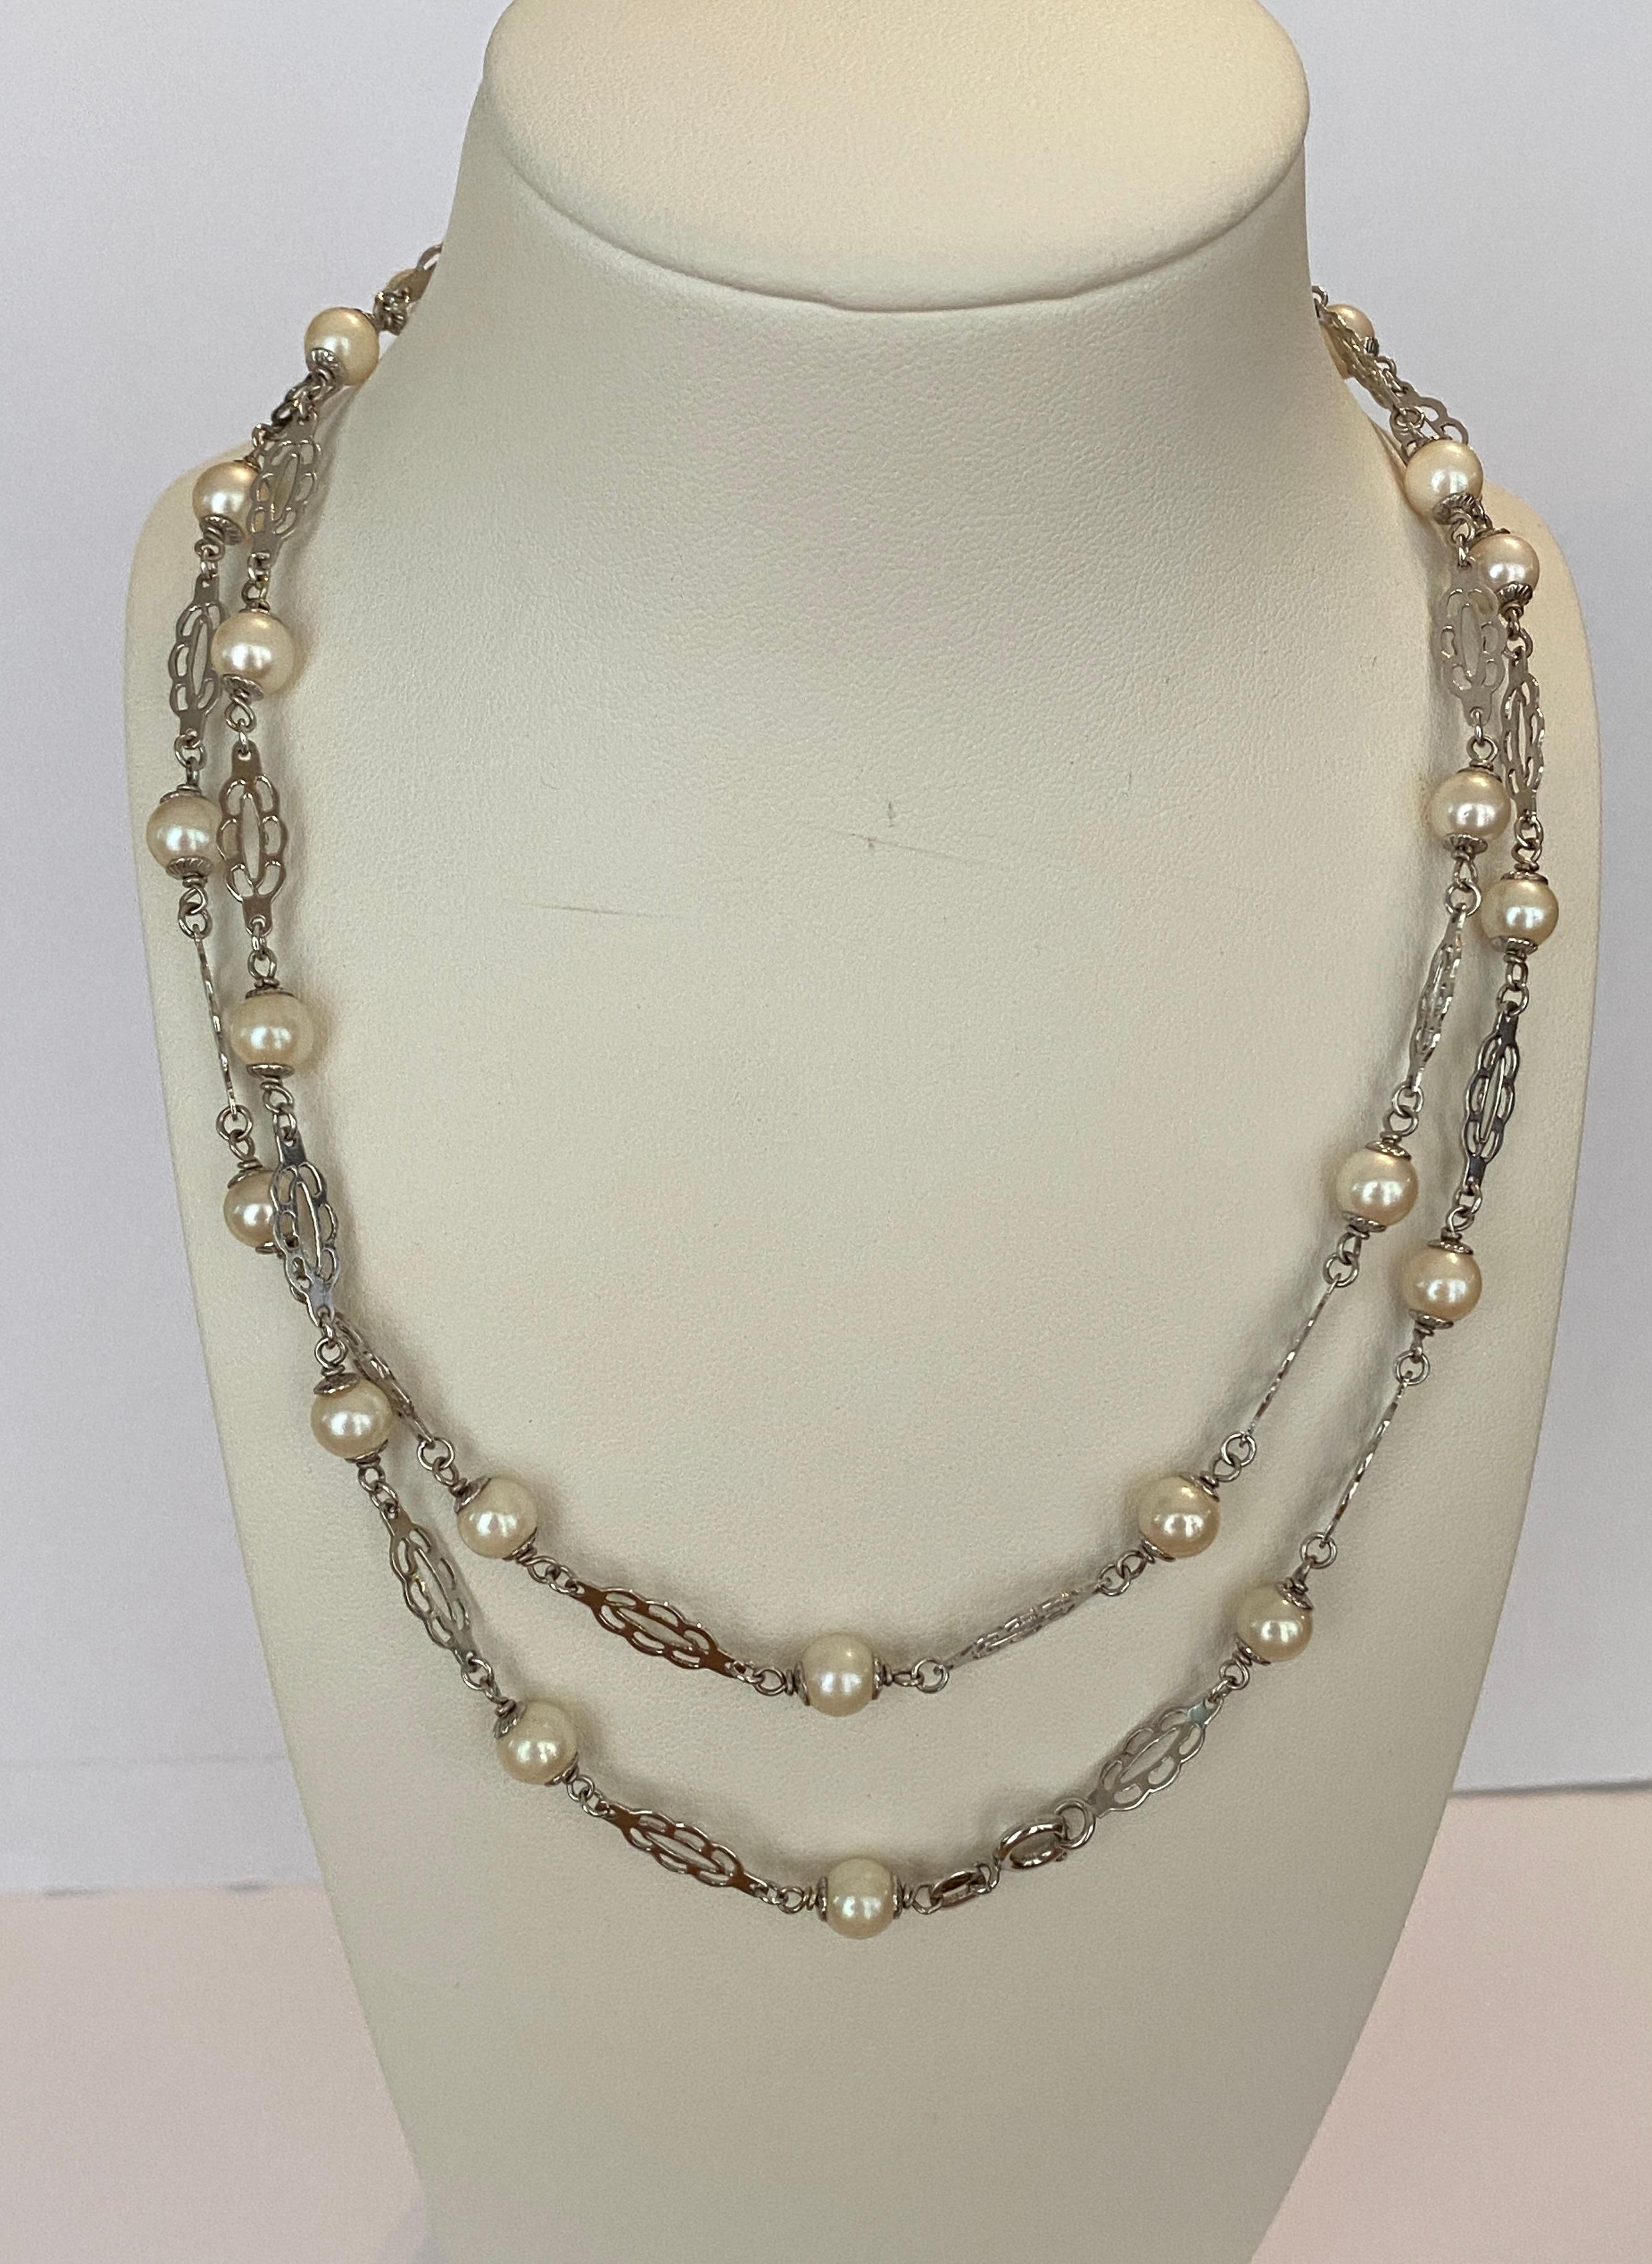 Offered is a vintage beautiful 14 KT white gold sautoir with pearls. The necklace is decorated with 52  natural freshwater cultured pearls. Pearls of great regularity and very fine luster. 
The size of the pearls: from 6.25 mm to 6.40 mm. 
Gold